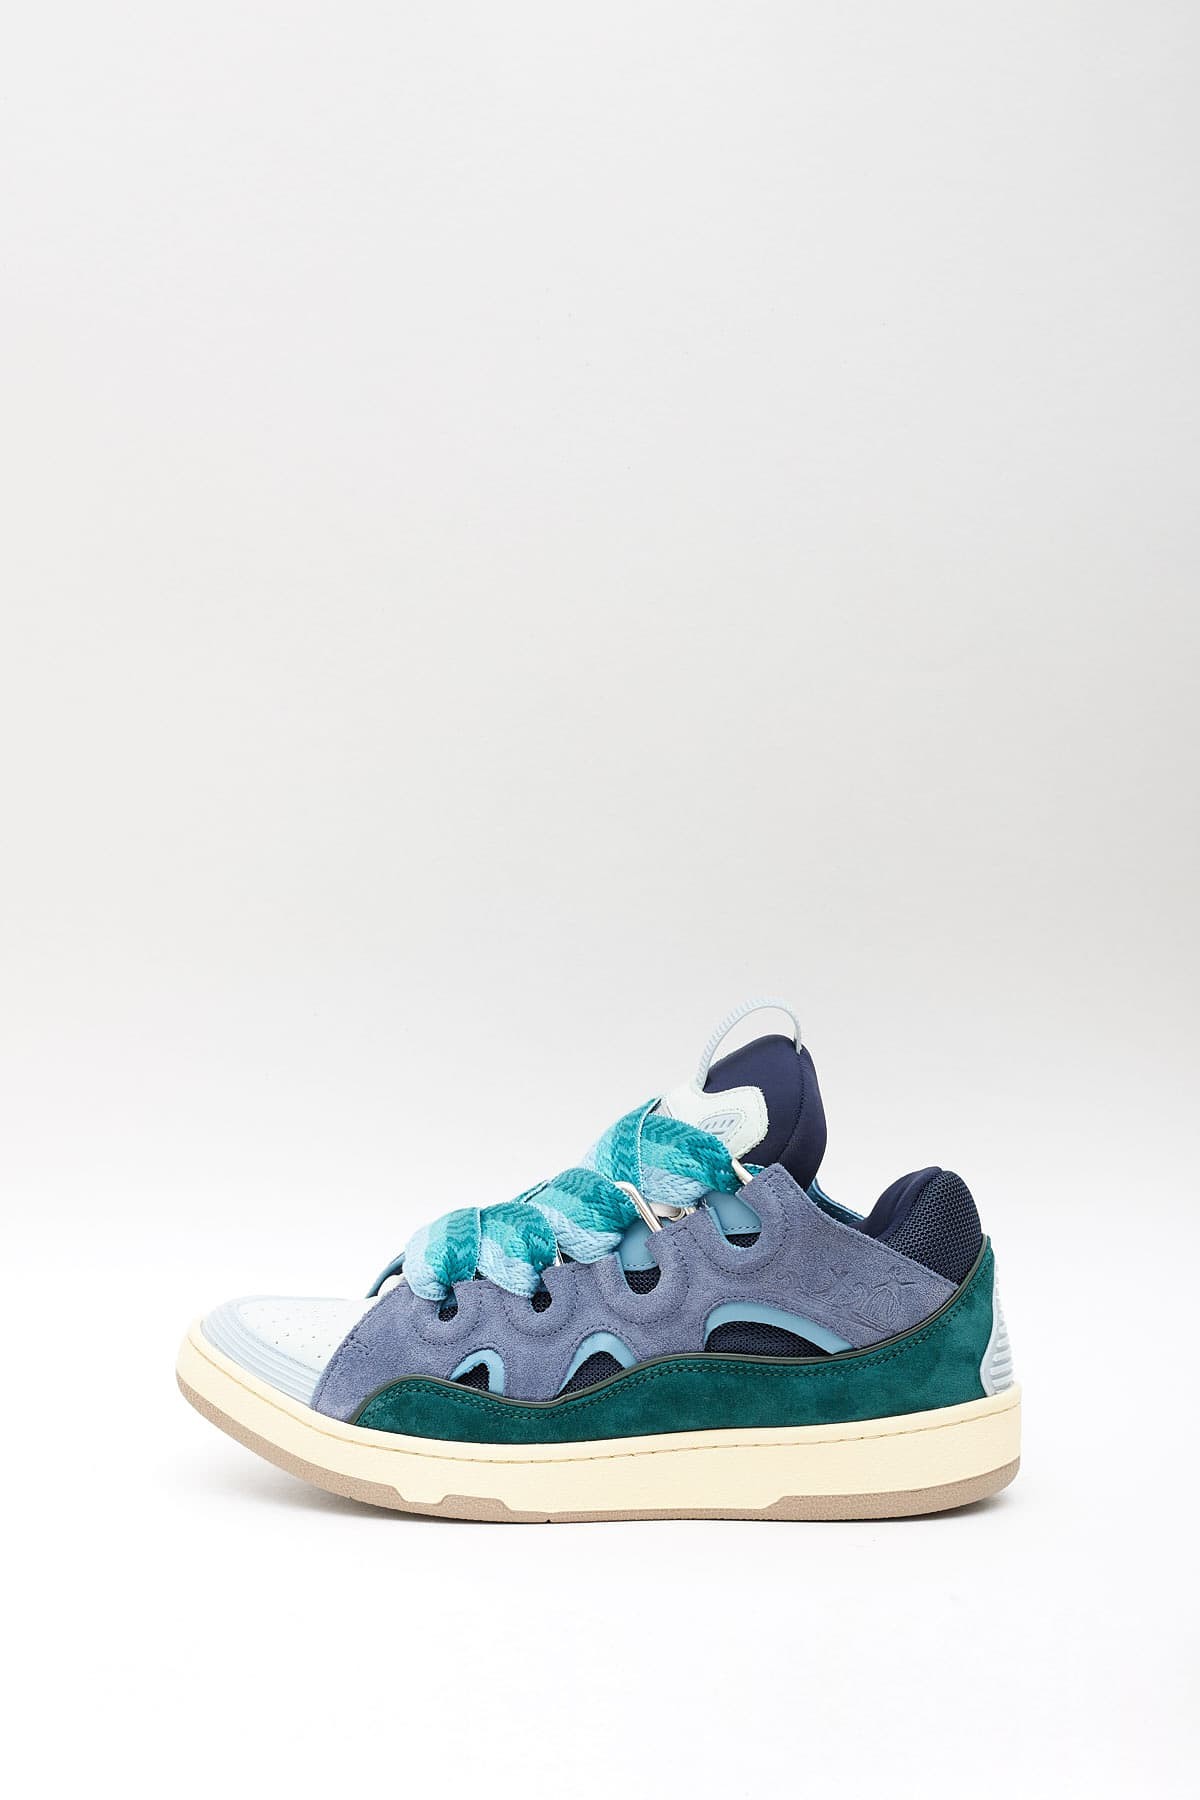 LANVIN BLUE LEATHER CURB SNEAKERS IAMNUE